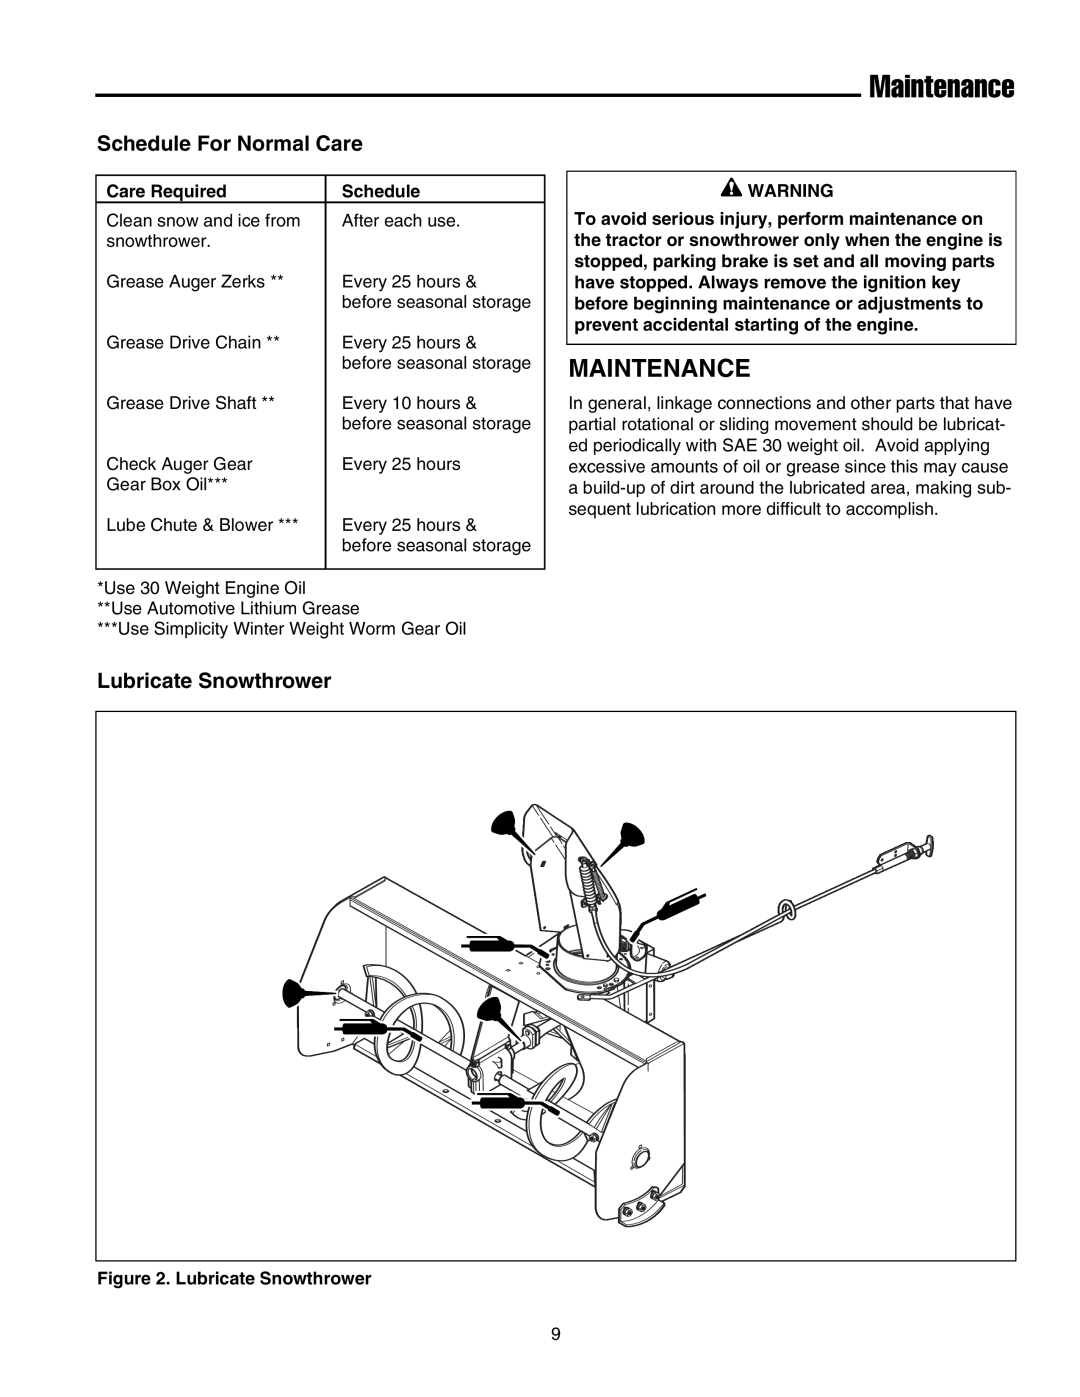 Simplicity 1694404 manual Maintenance, Schedule For Normal Care, Lubricate Snowthrower 